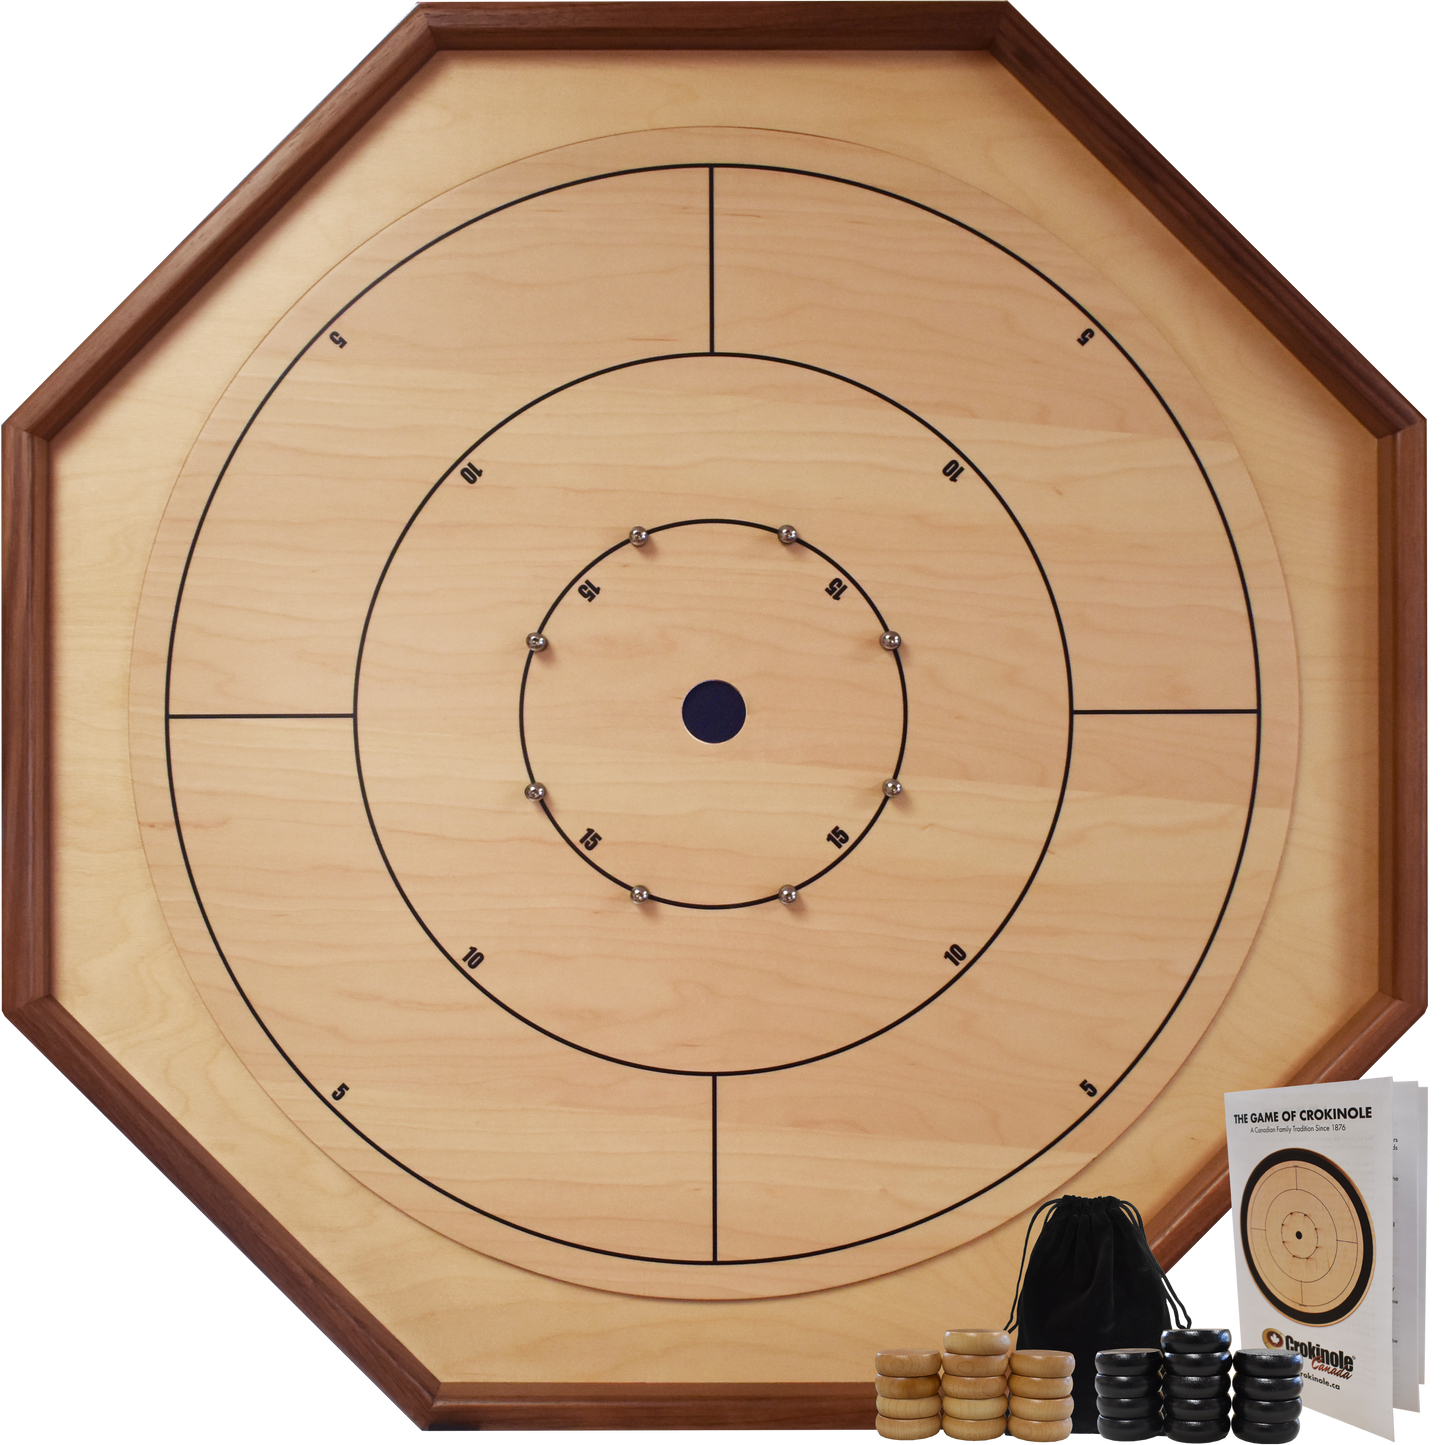 The Deluxe Walnut Rail - Traditional Octagon Crokinole Board Game Set